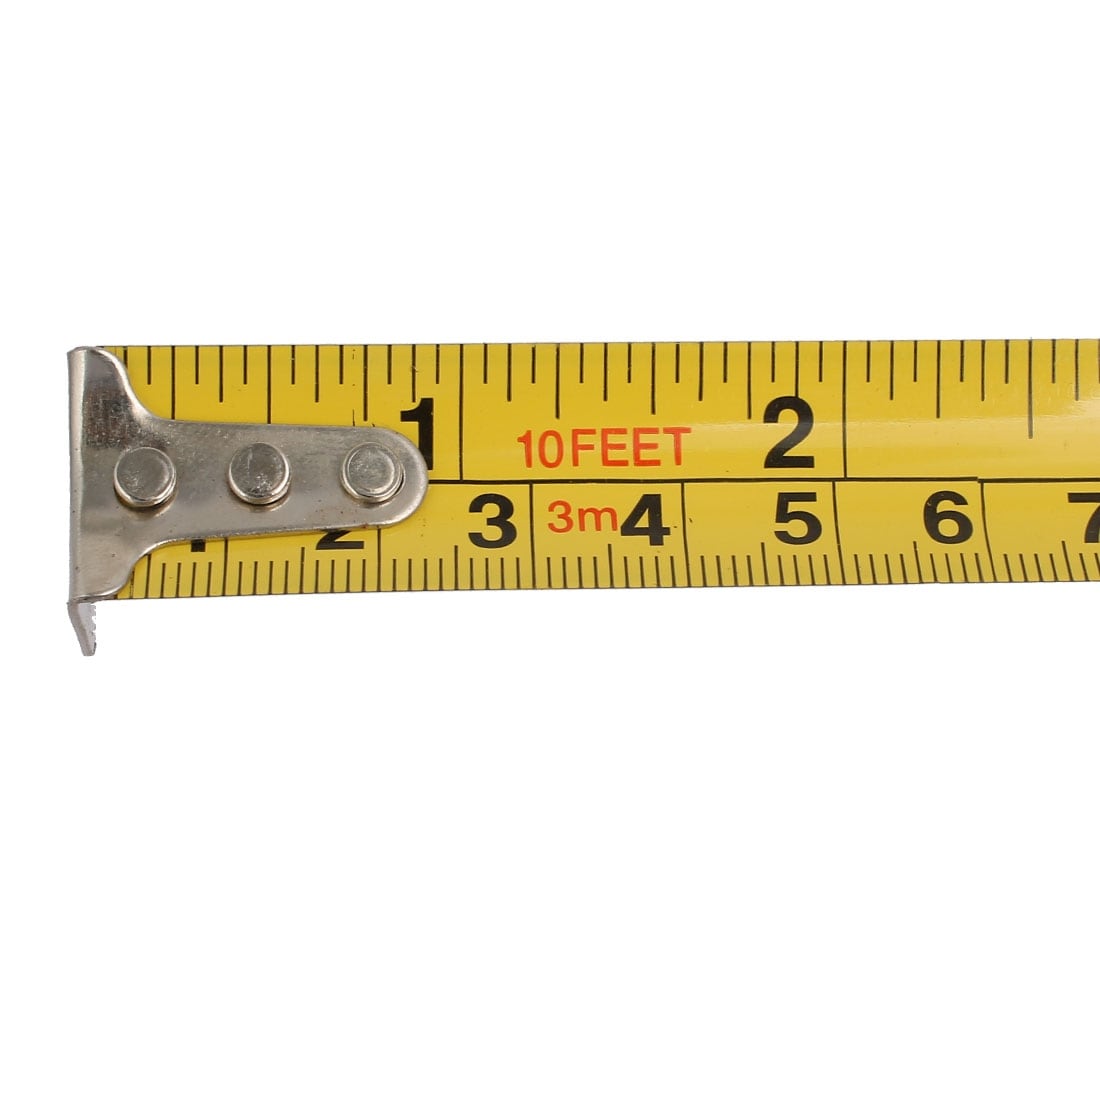 https://ak1.ostkcdn.com/images/products/is/images/direct/fb9330af6abb8a802488a47edf2ddfa09eb7c84a/10Ft-Plastic-Case-Retractable-Imperial-and-Metric-Measuring-Tape-Green.jpg